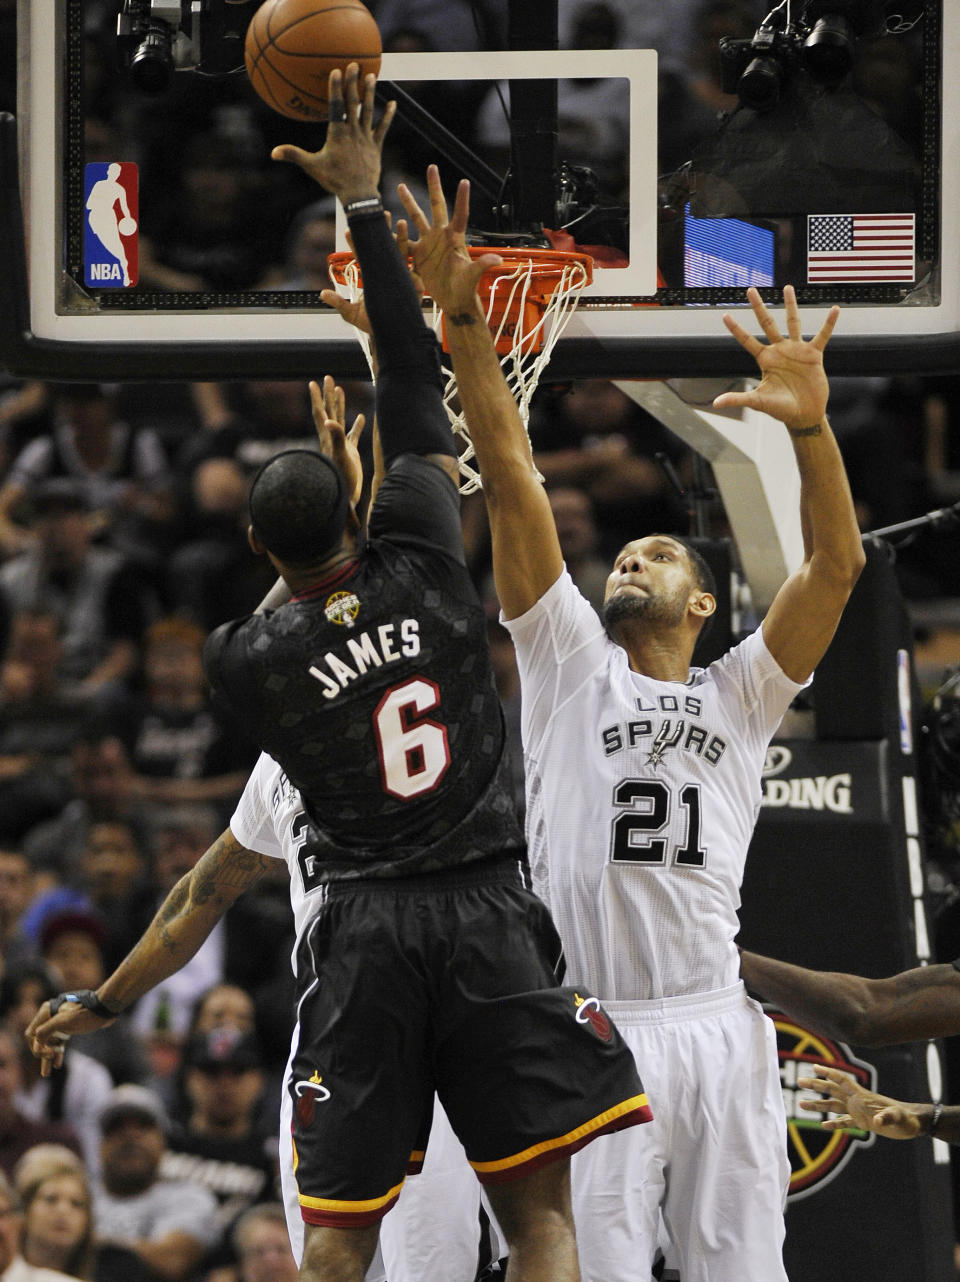 San Antonio Spurs forward Tim Duncan, right, defends Miami Heat forward LeBron James during the first half of an NBA basketball game on Thursday, March 6, 2014, in San Antonio. (AP Photo/Darren Abate)